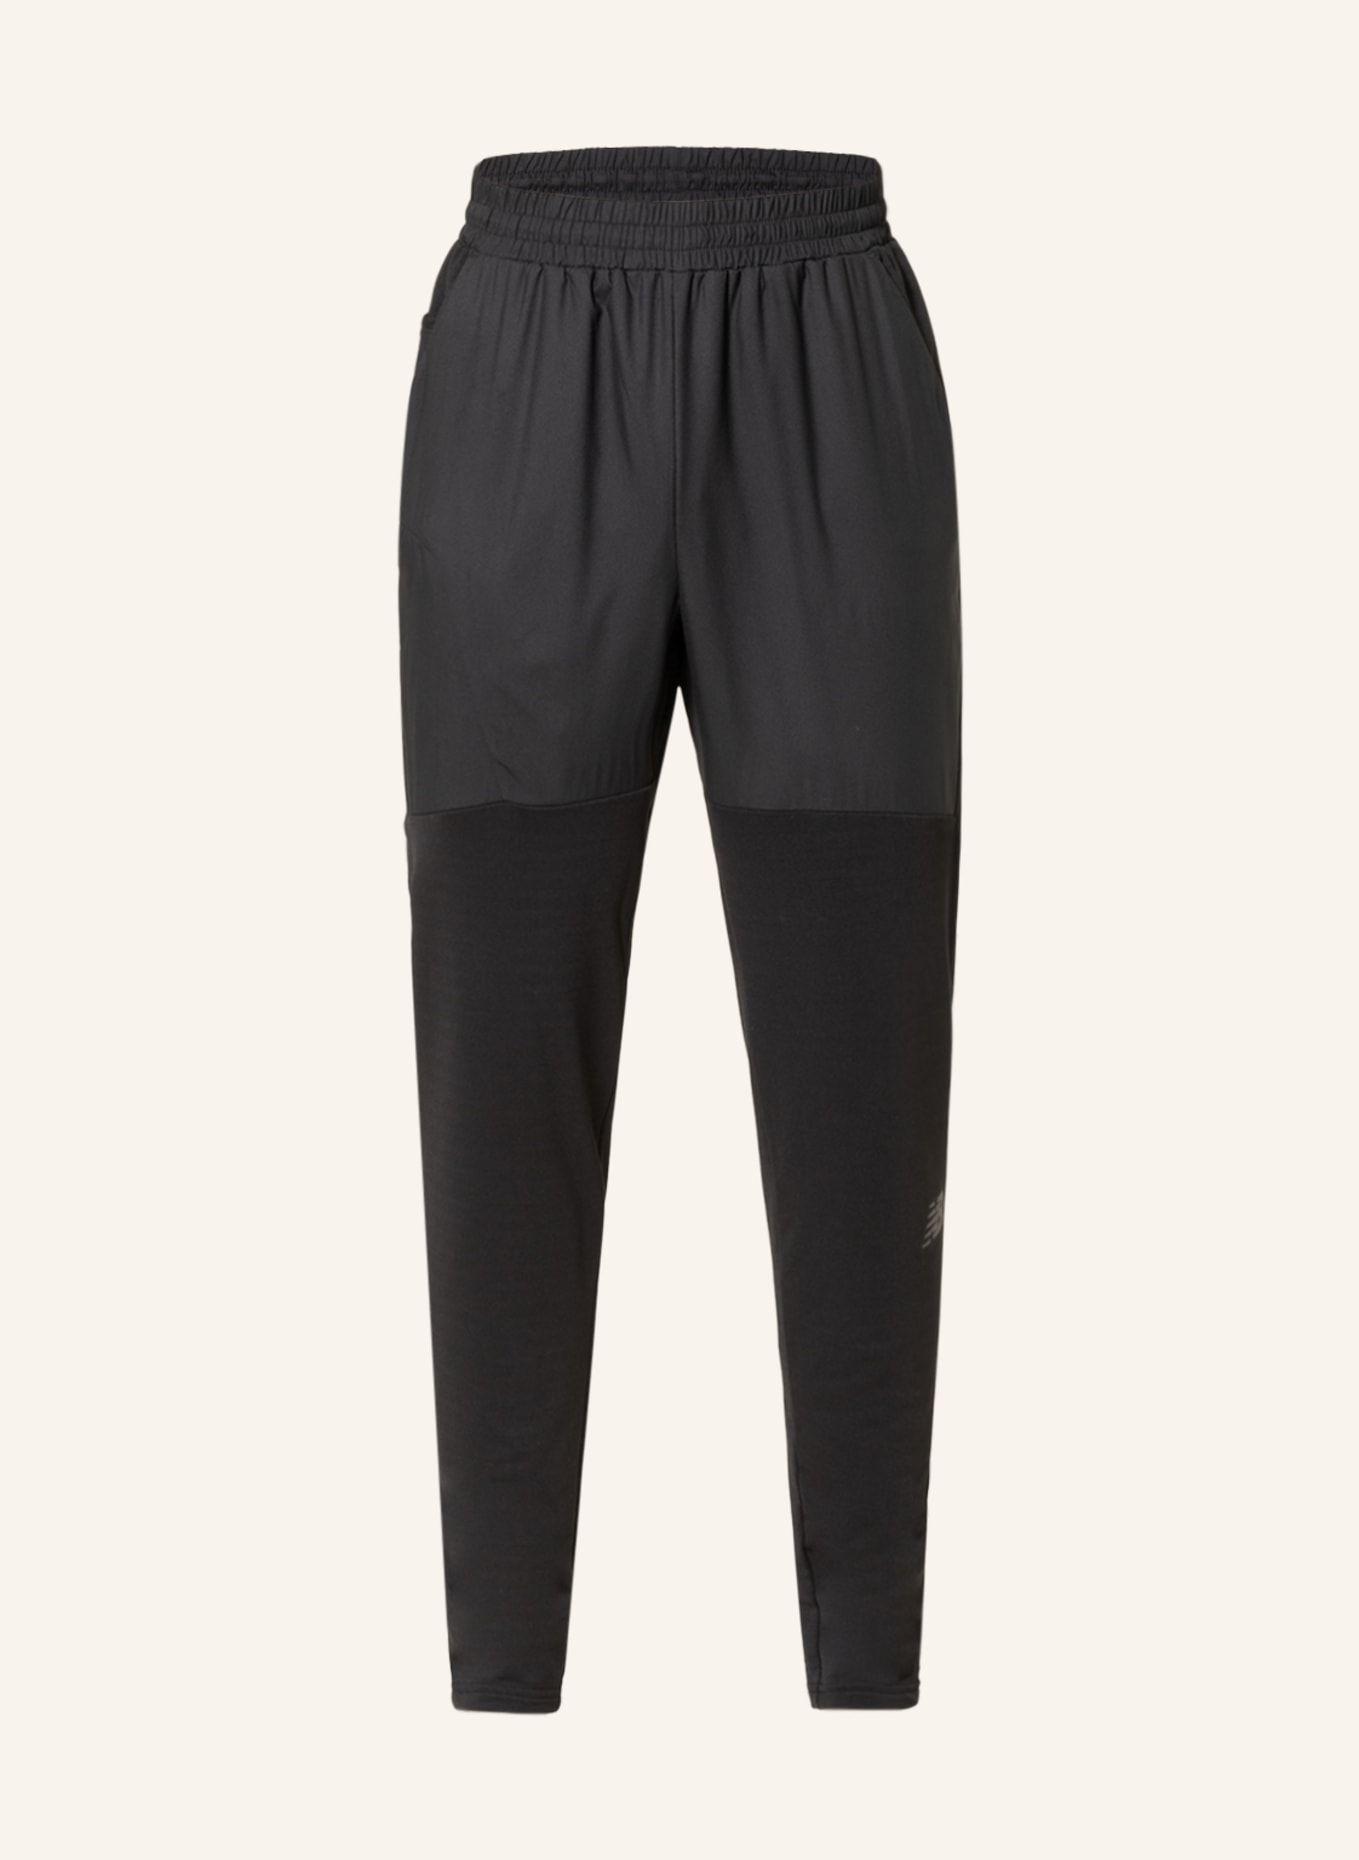 New Balance Accelerate running tights in black  ASOS